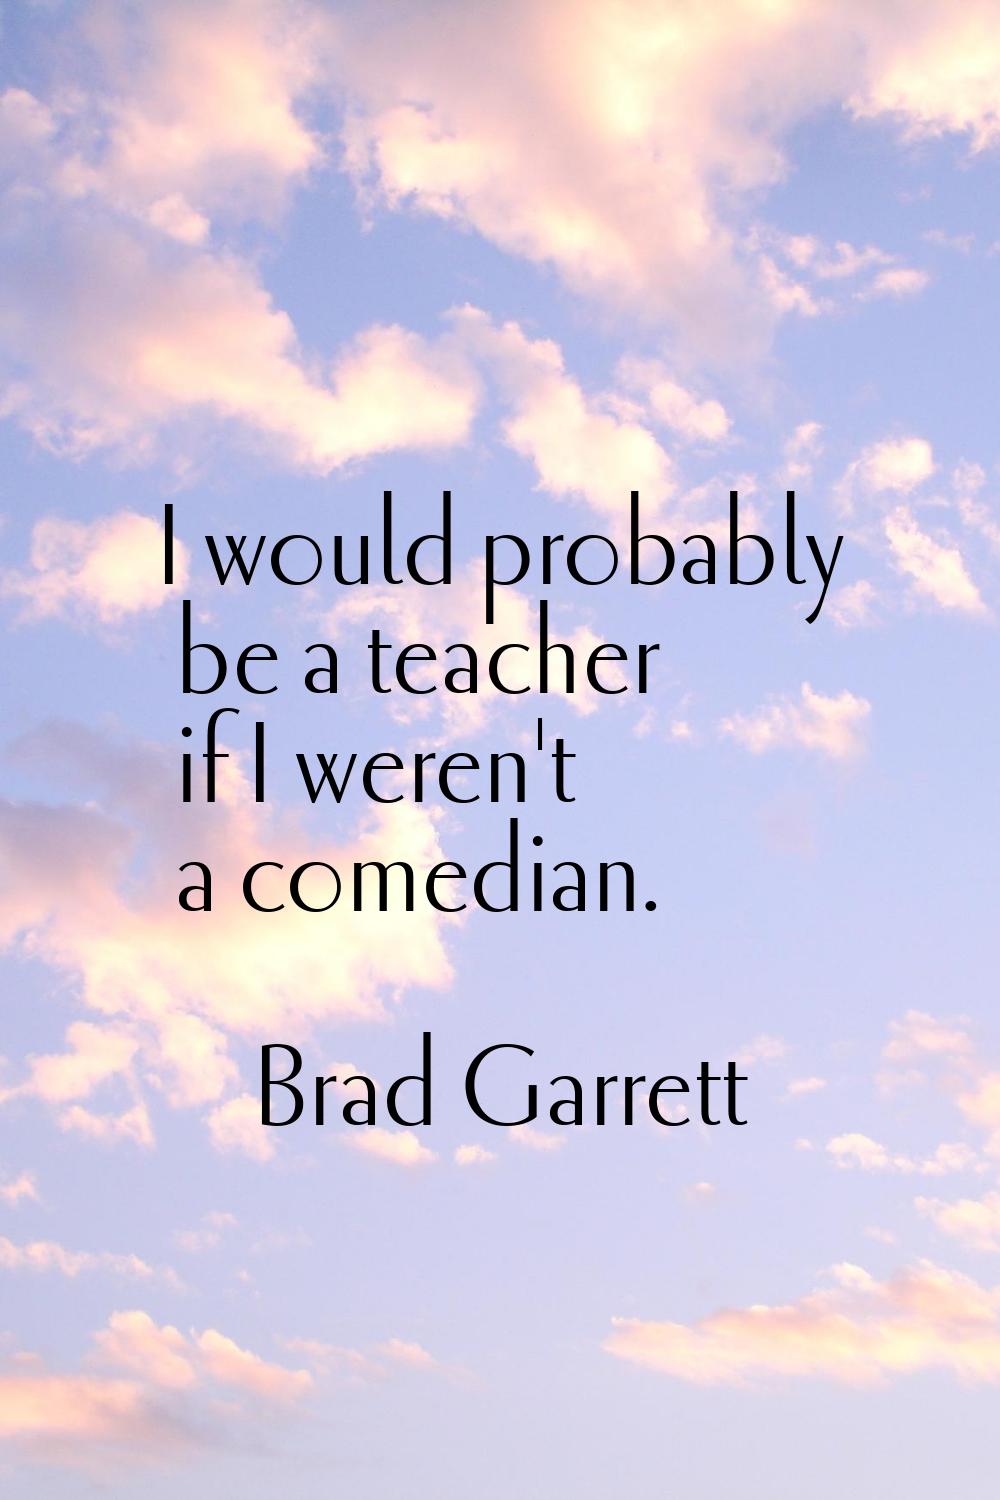 I would probably be a teacher if I weren't a comedian.